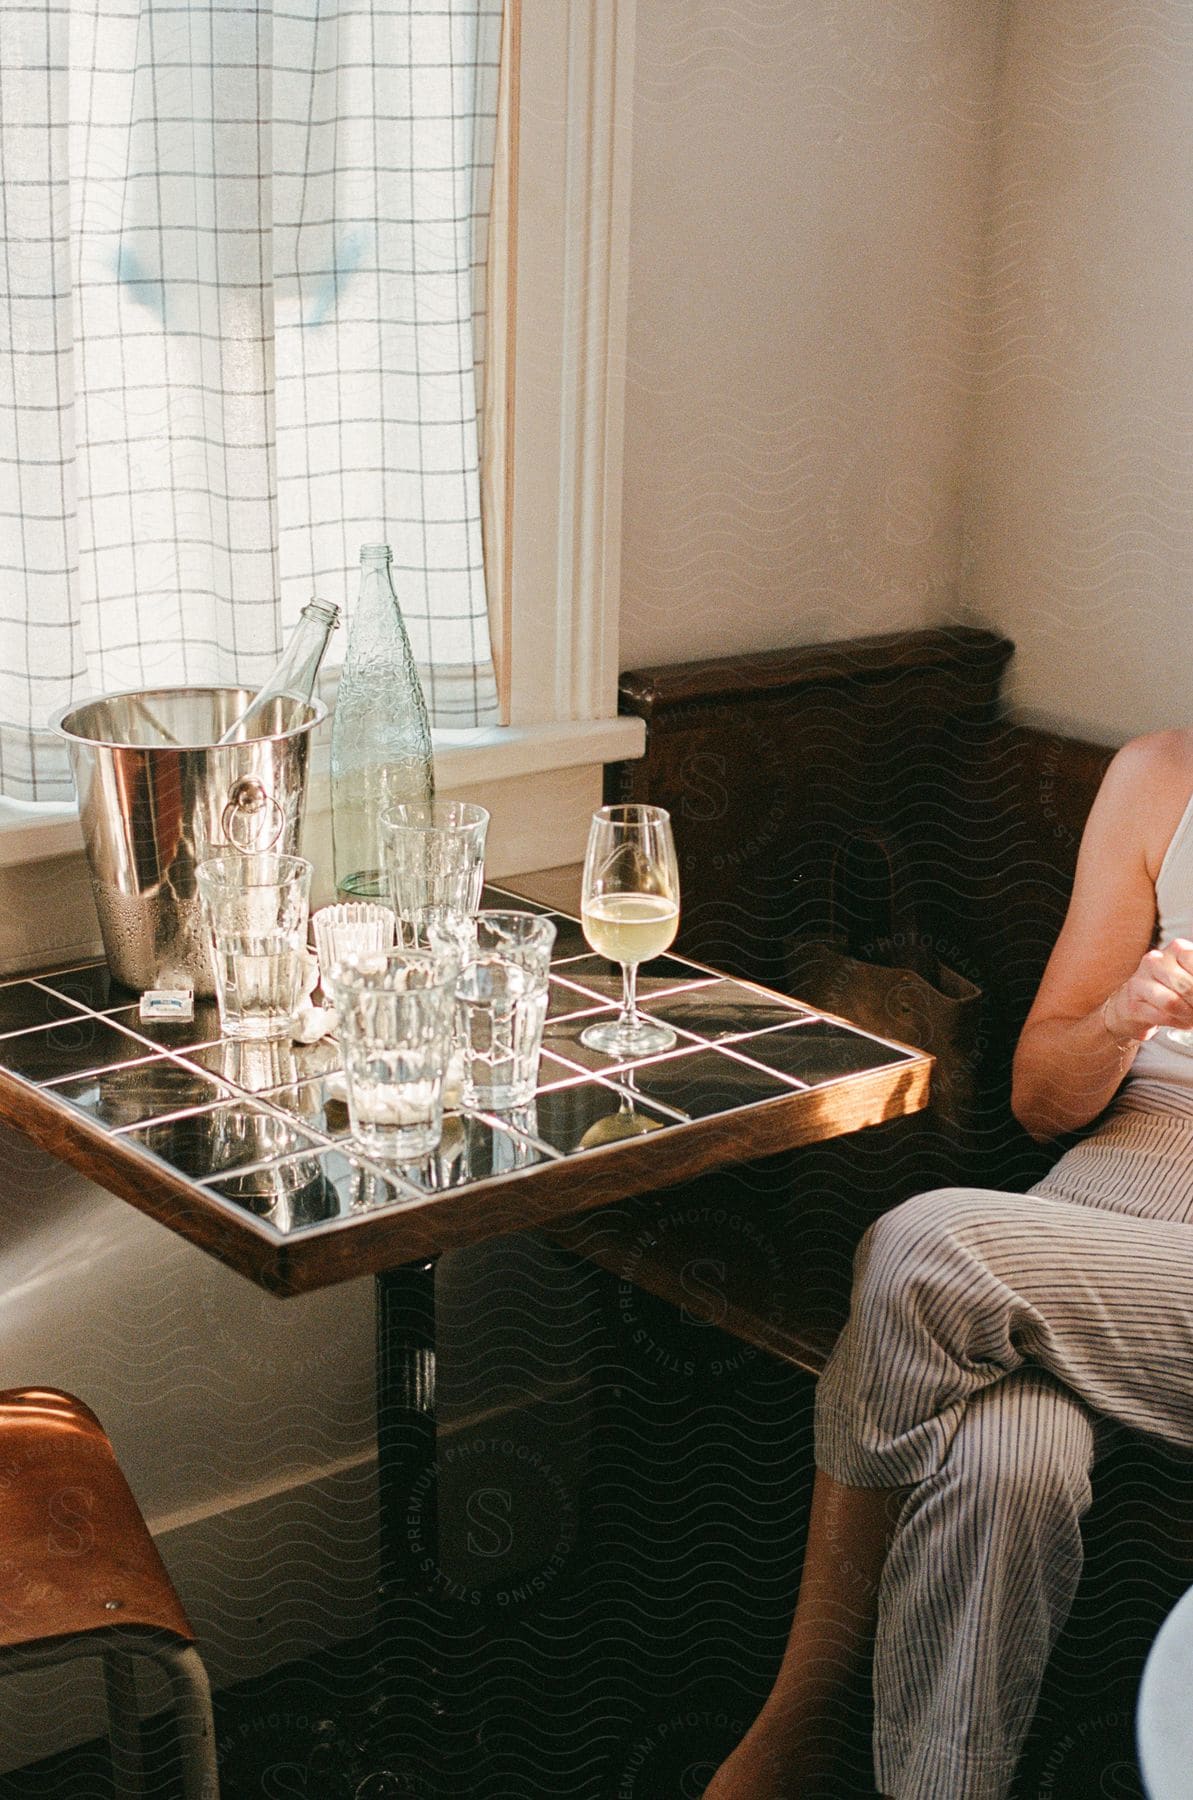 Table setting with empty glasses and a wine bottle next to a seated woman in a well-lit room.